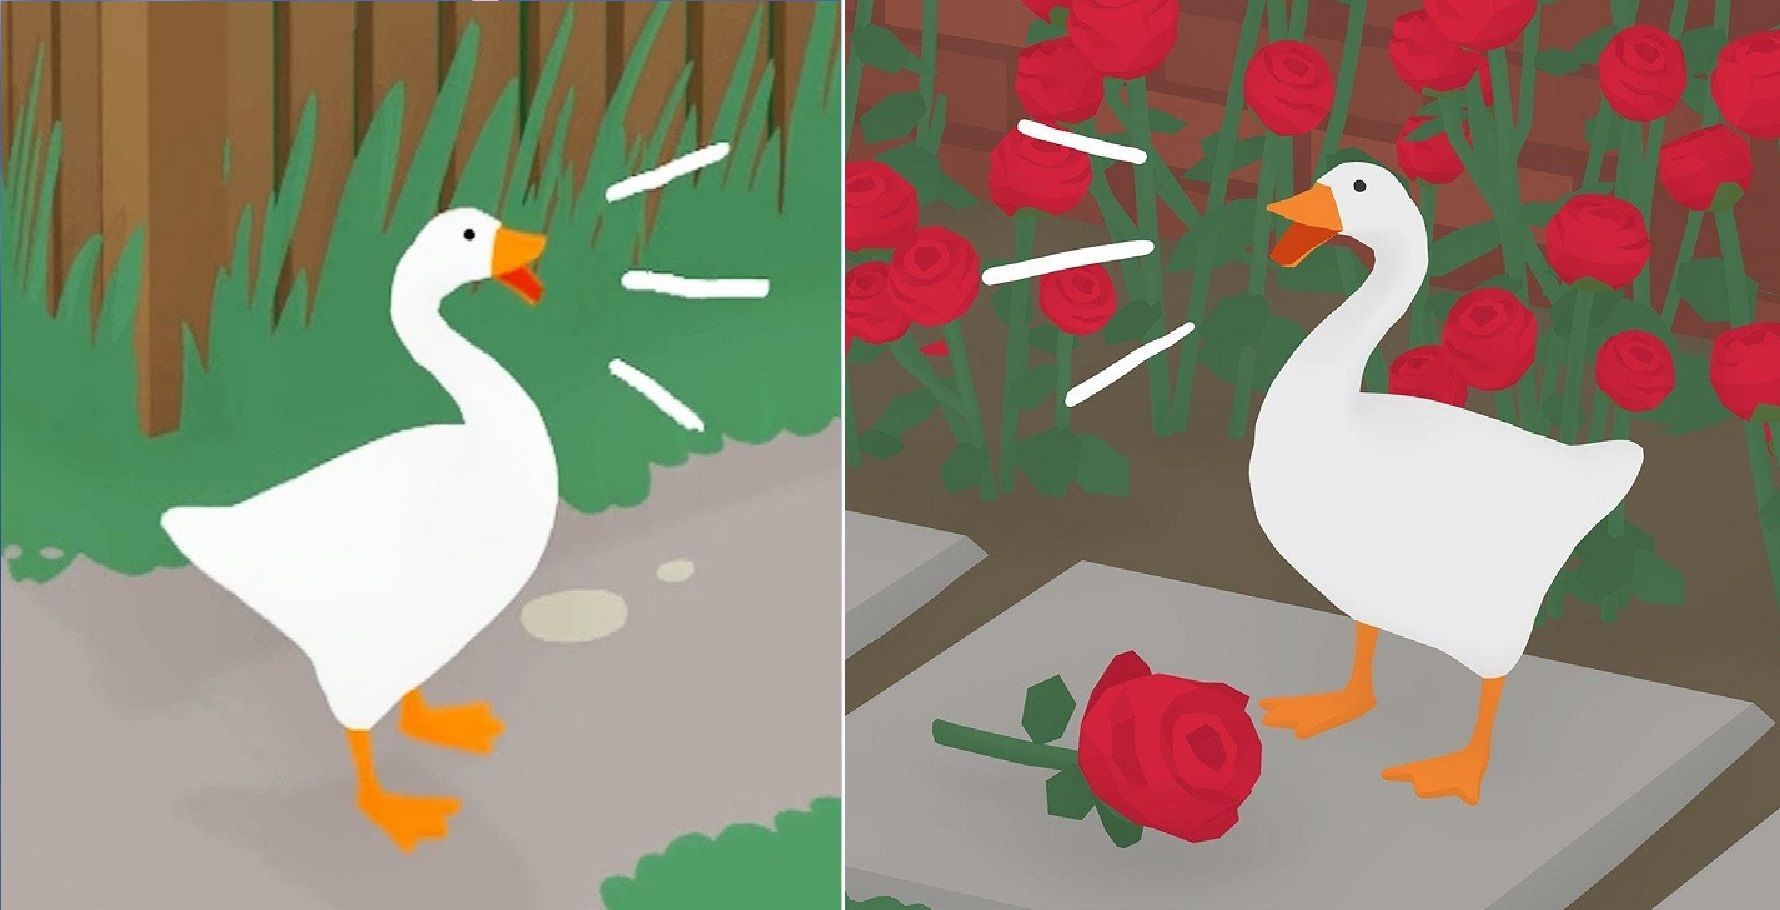 5 Things We Loved And 5 Things We Hated About Untitled Goose Game